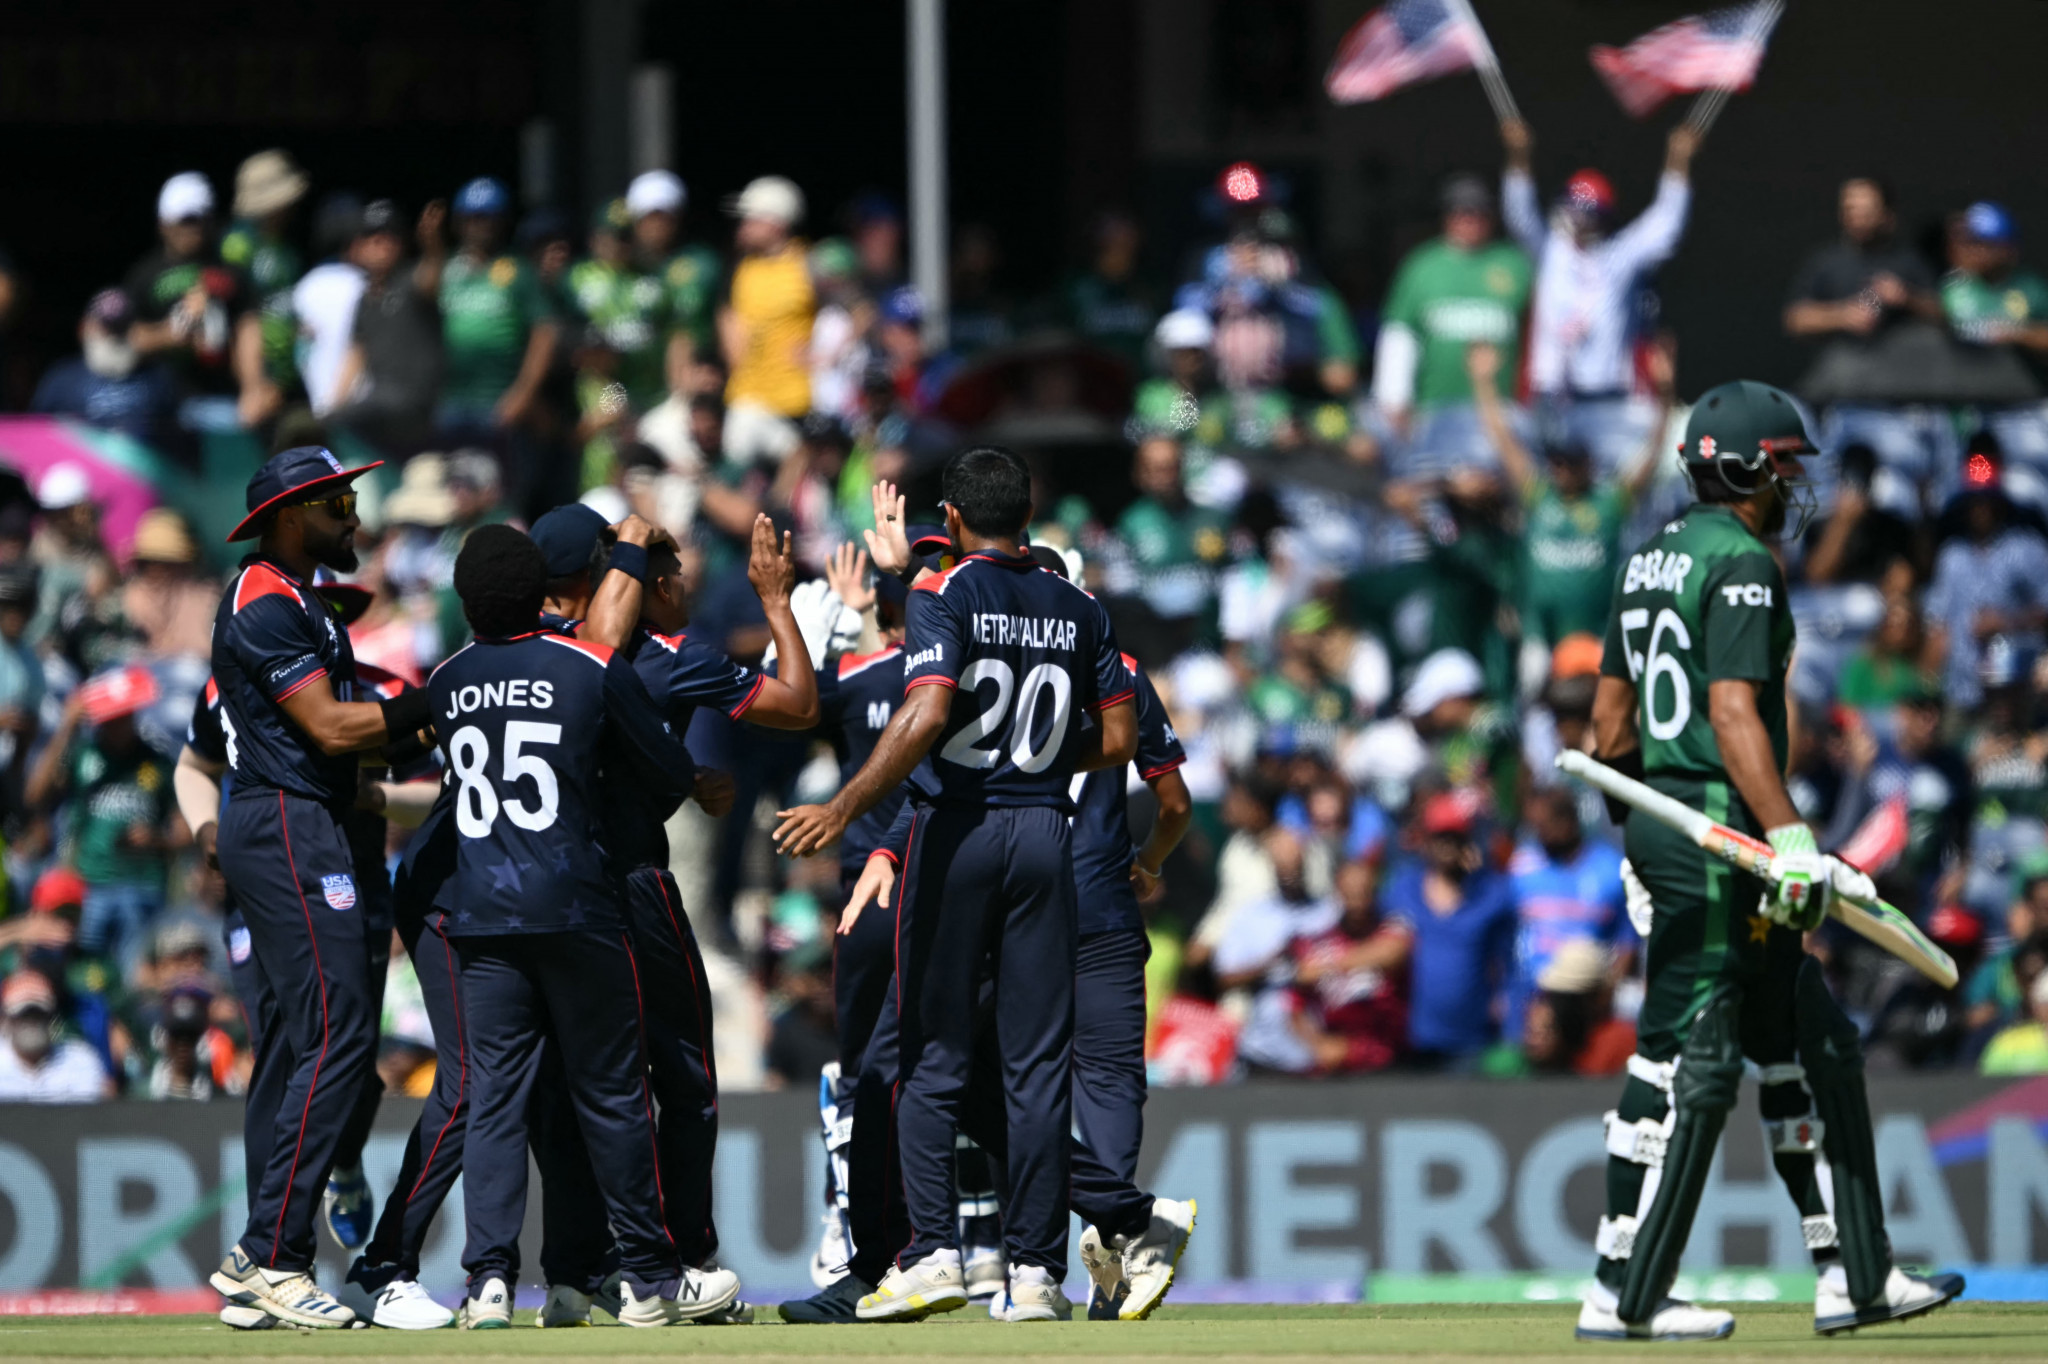 USA clinched a thrilling Super Over victory against Pakistan in Texas to stun the cricket world. GETTY IMAGES